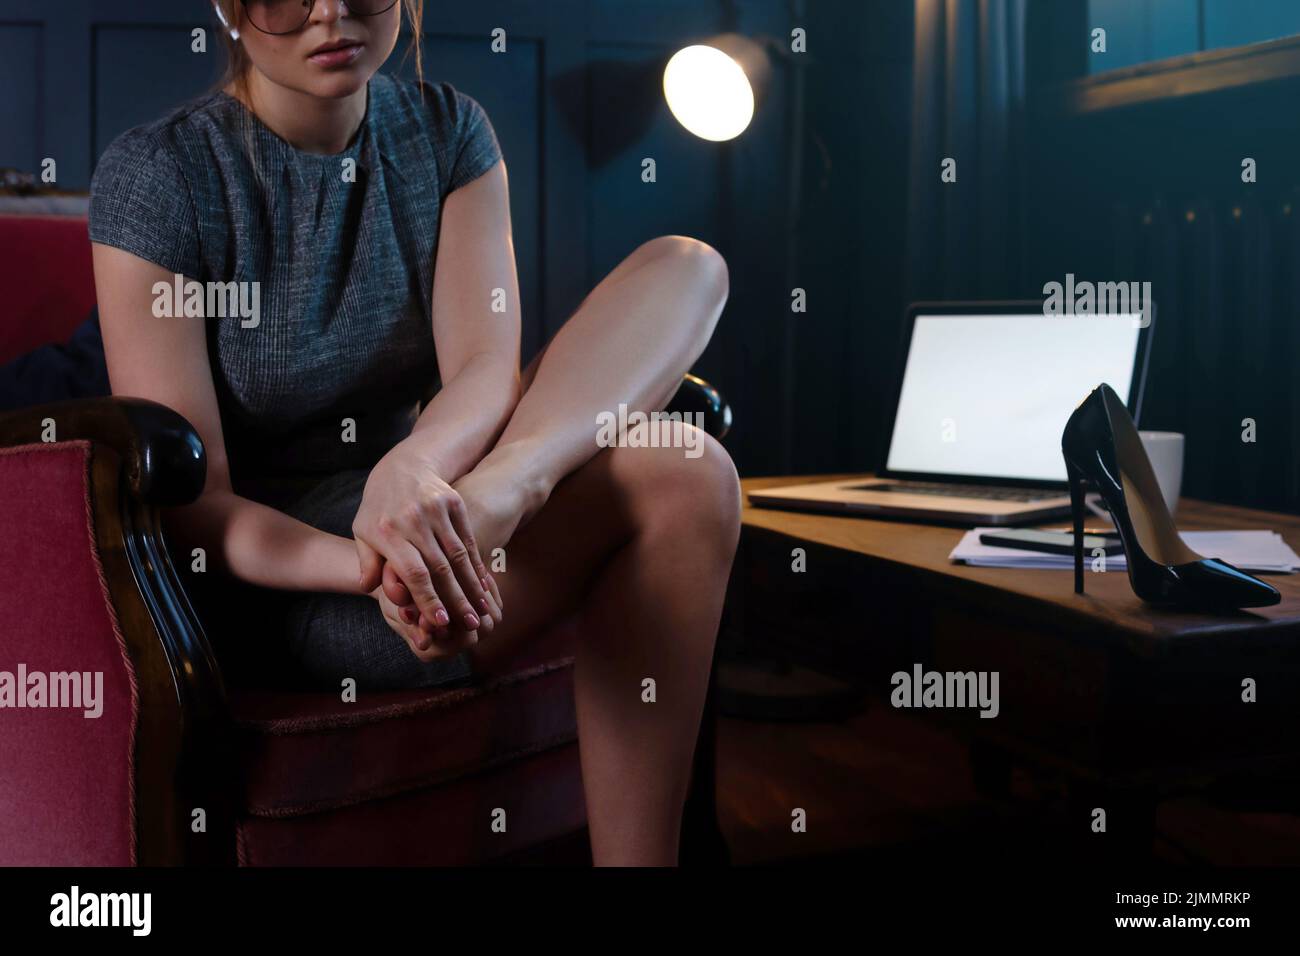 Business woman with aching feet after long working day of wearing high heels Stock Photo